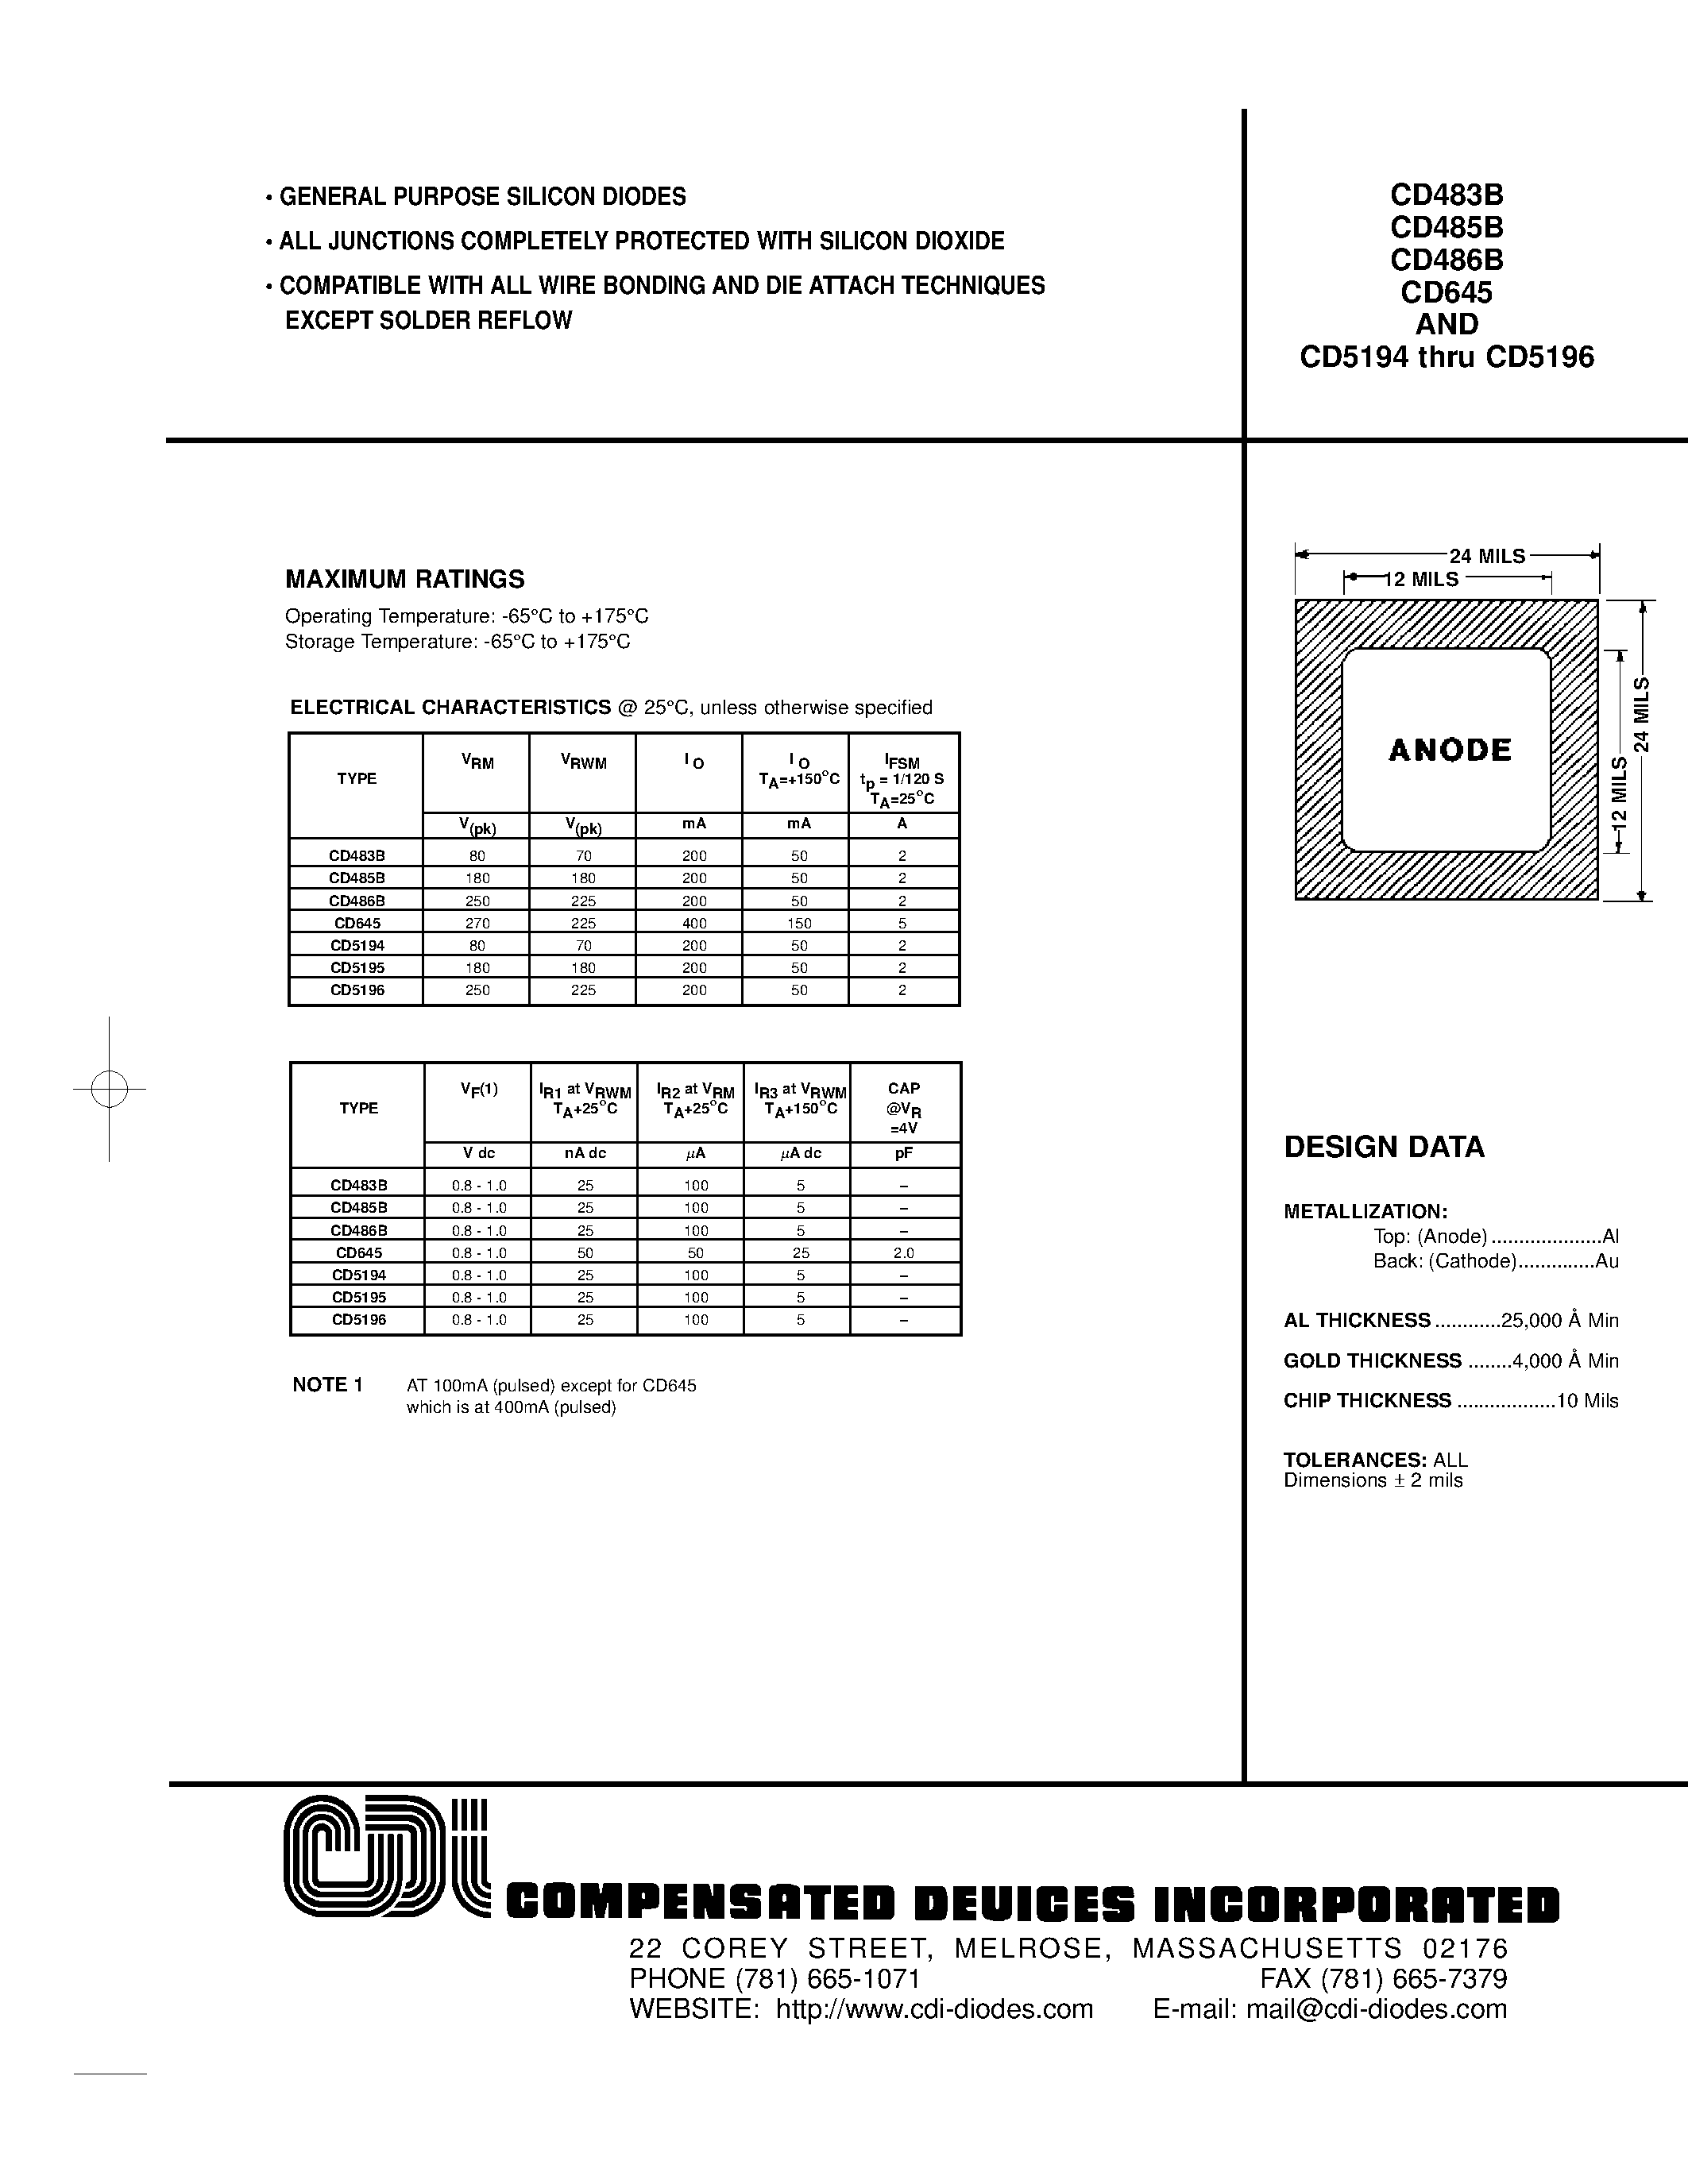 Даташит CD645 - GENERAL PURPOSE SILICON DIODES страница 1